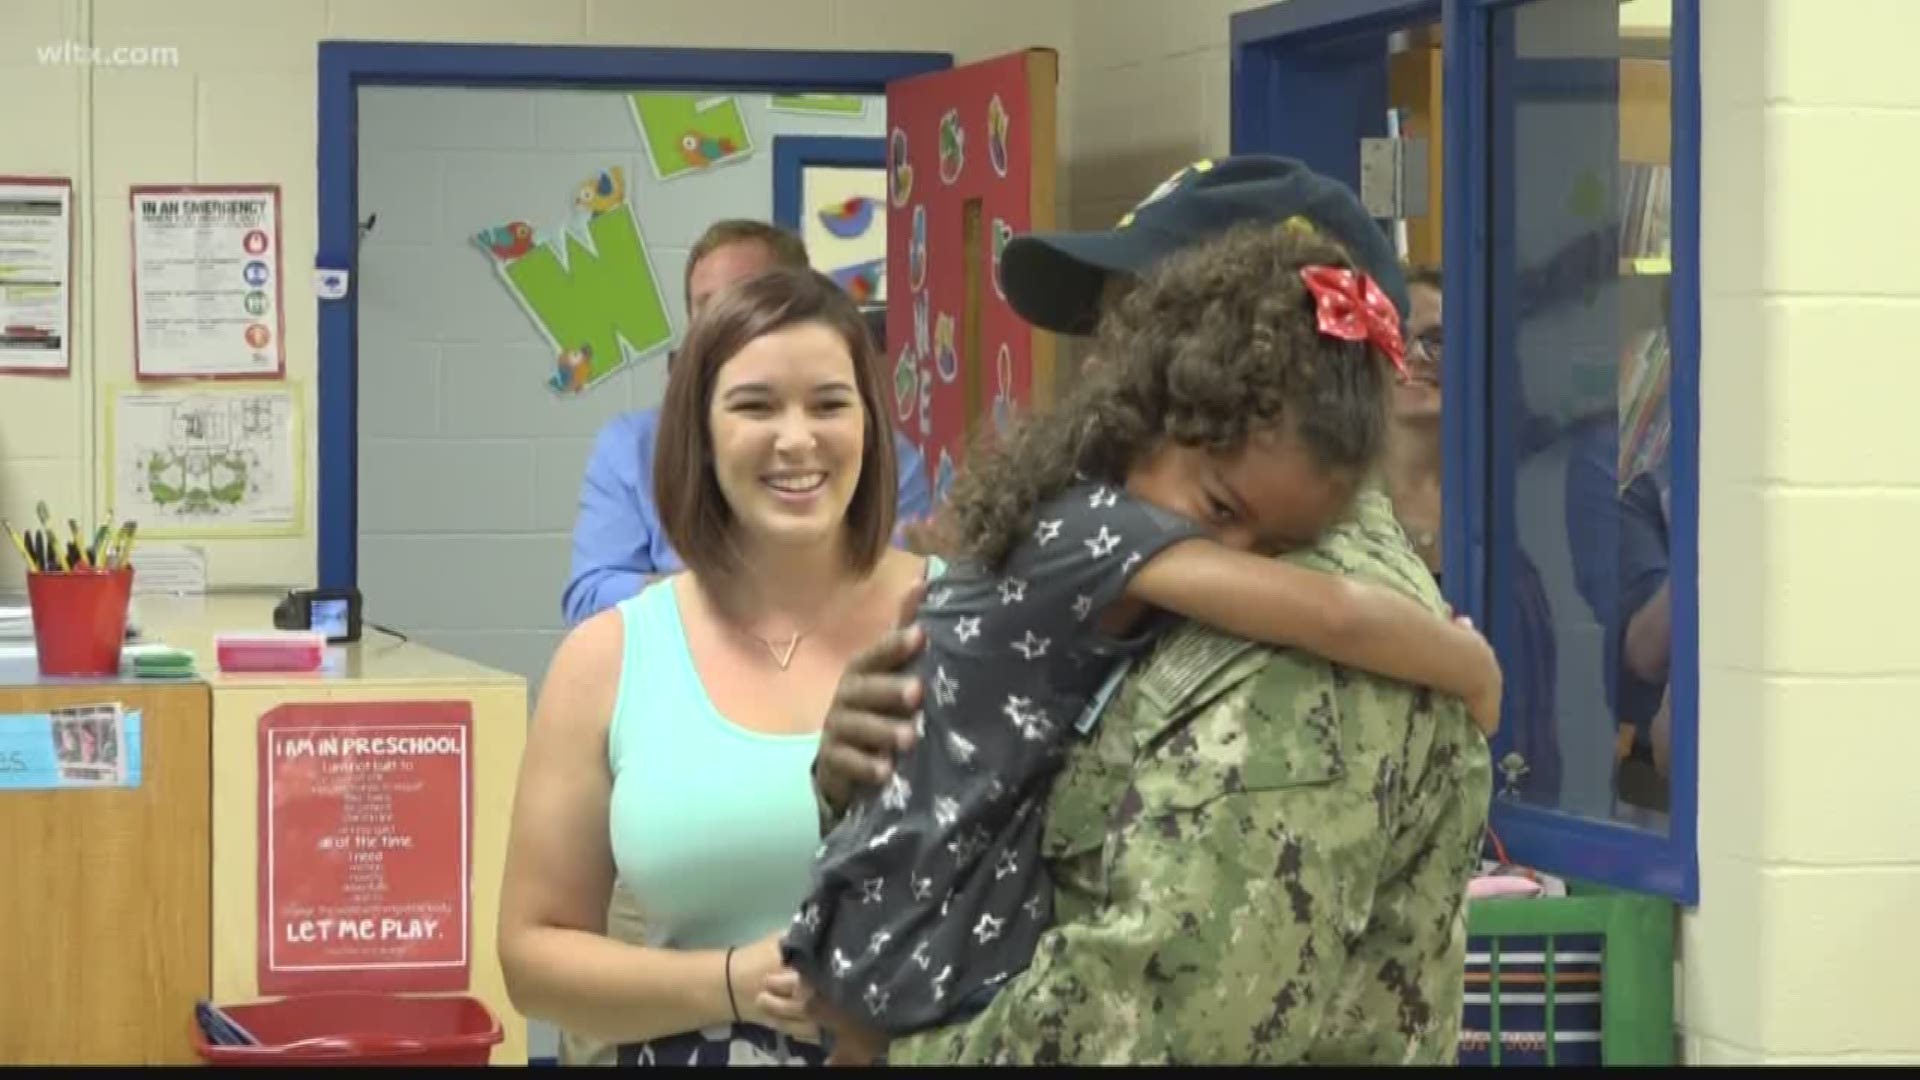 A military parent returning home from a long deployment to surprise their unsuspecting child in school.